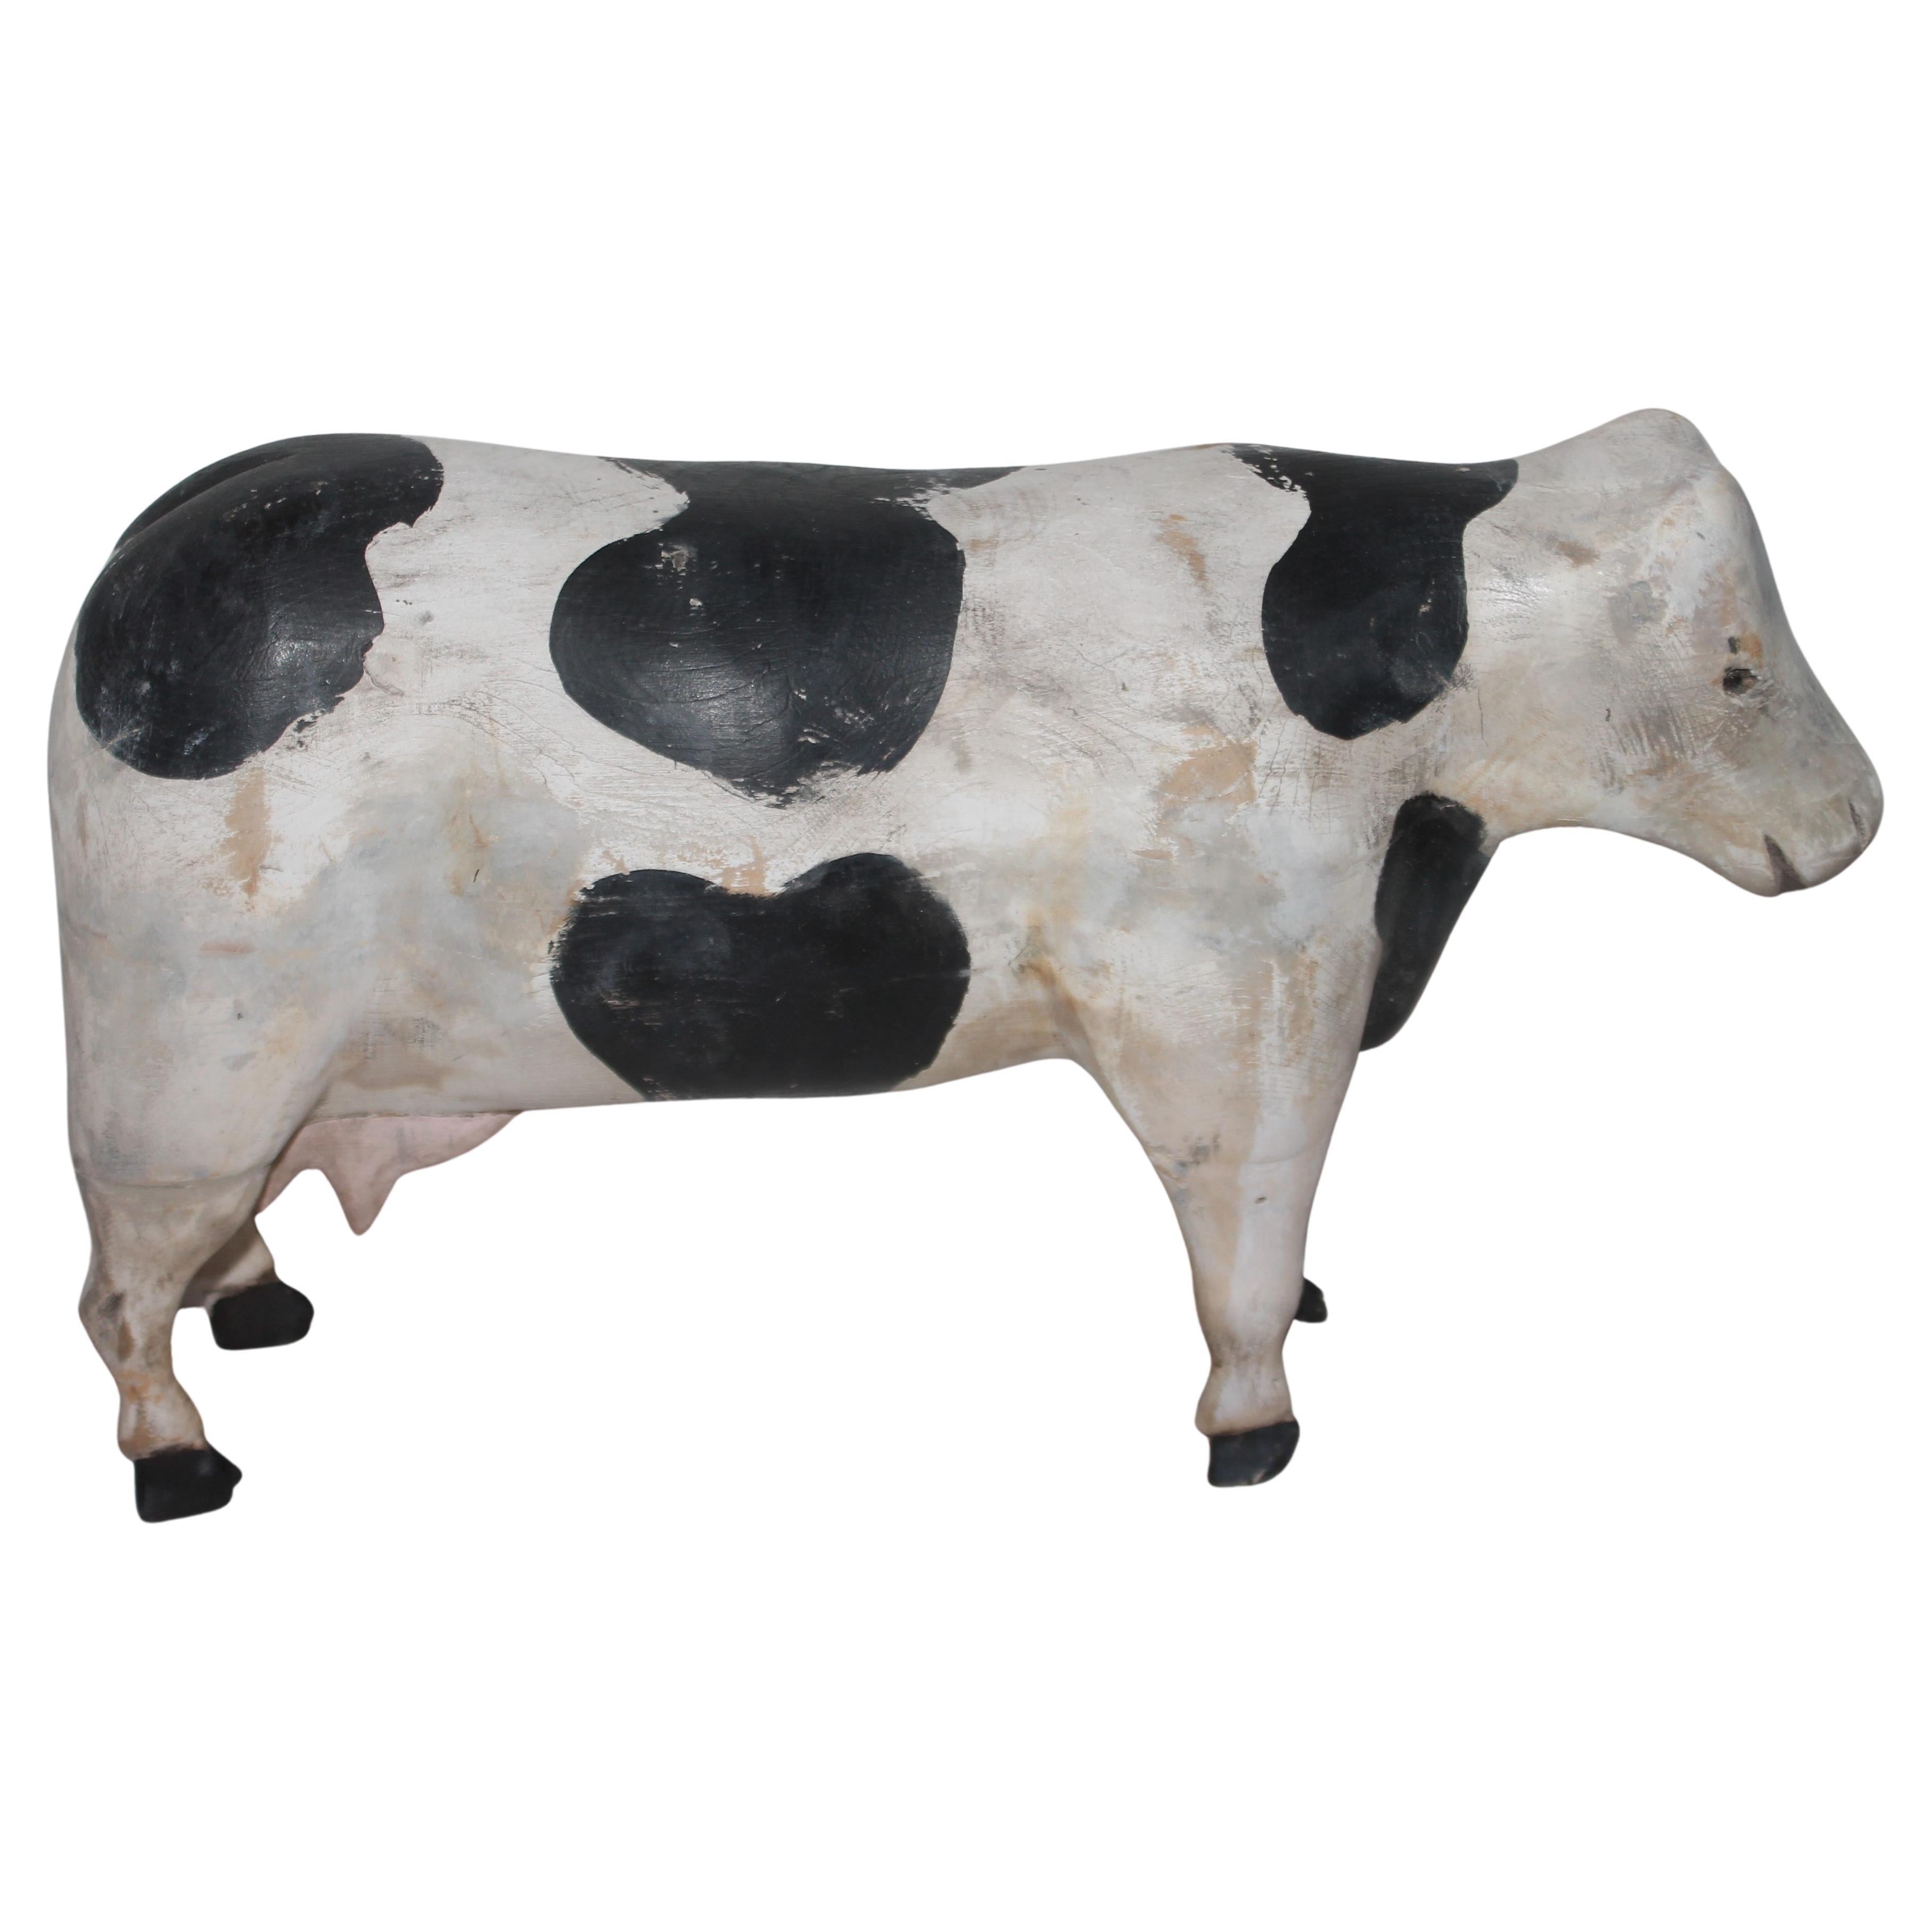 This fun folky hand carved & painted cow sculpture is in good condition with minor shrinkage cracks and some paint loss. This folky hand carved cow is such a fun toy.